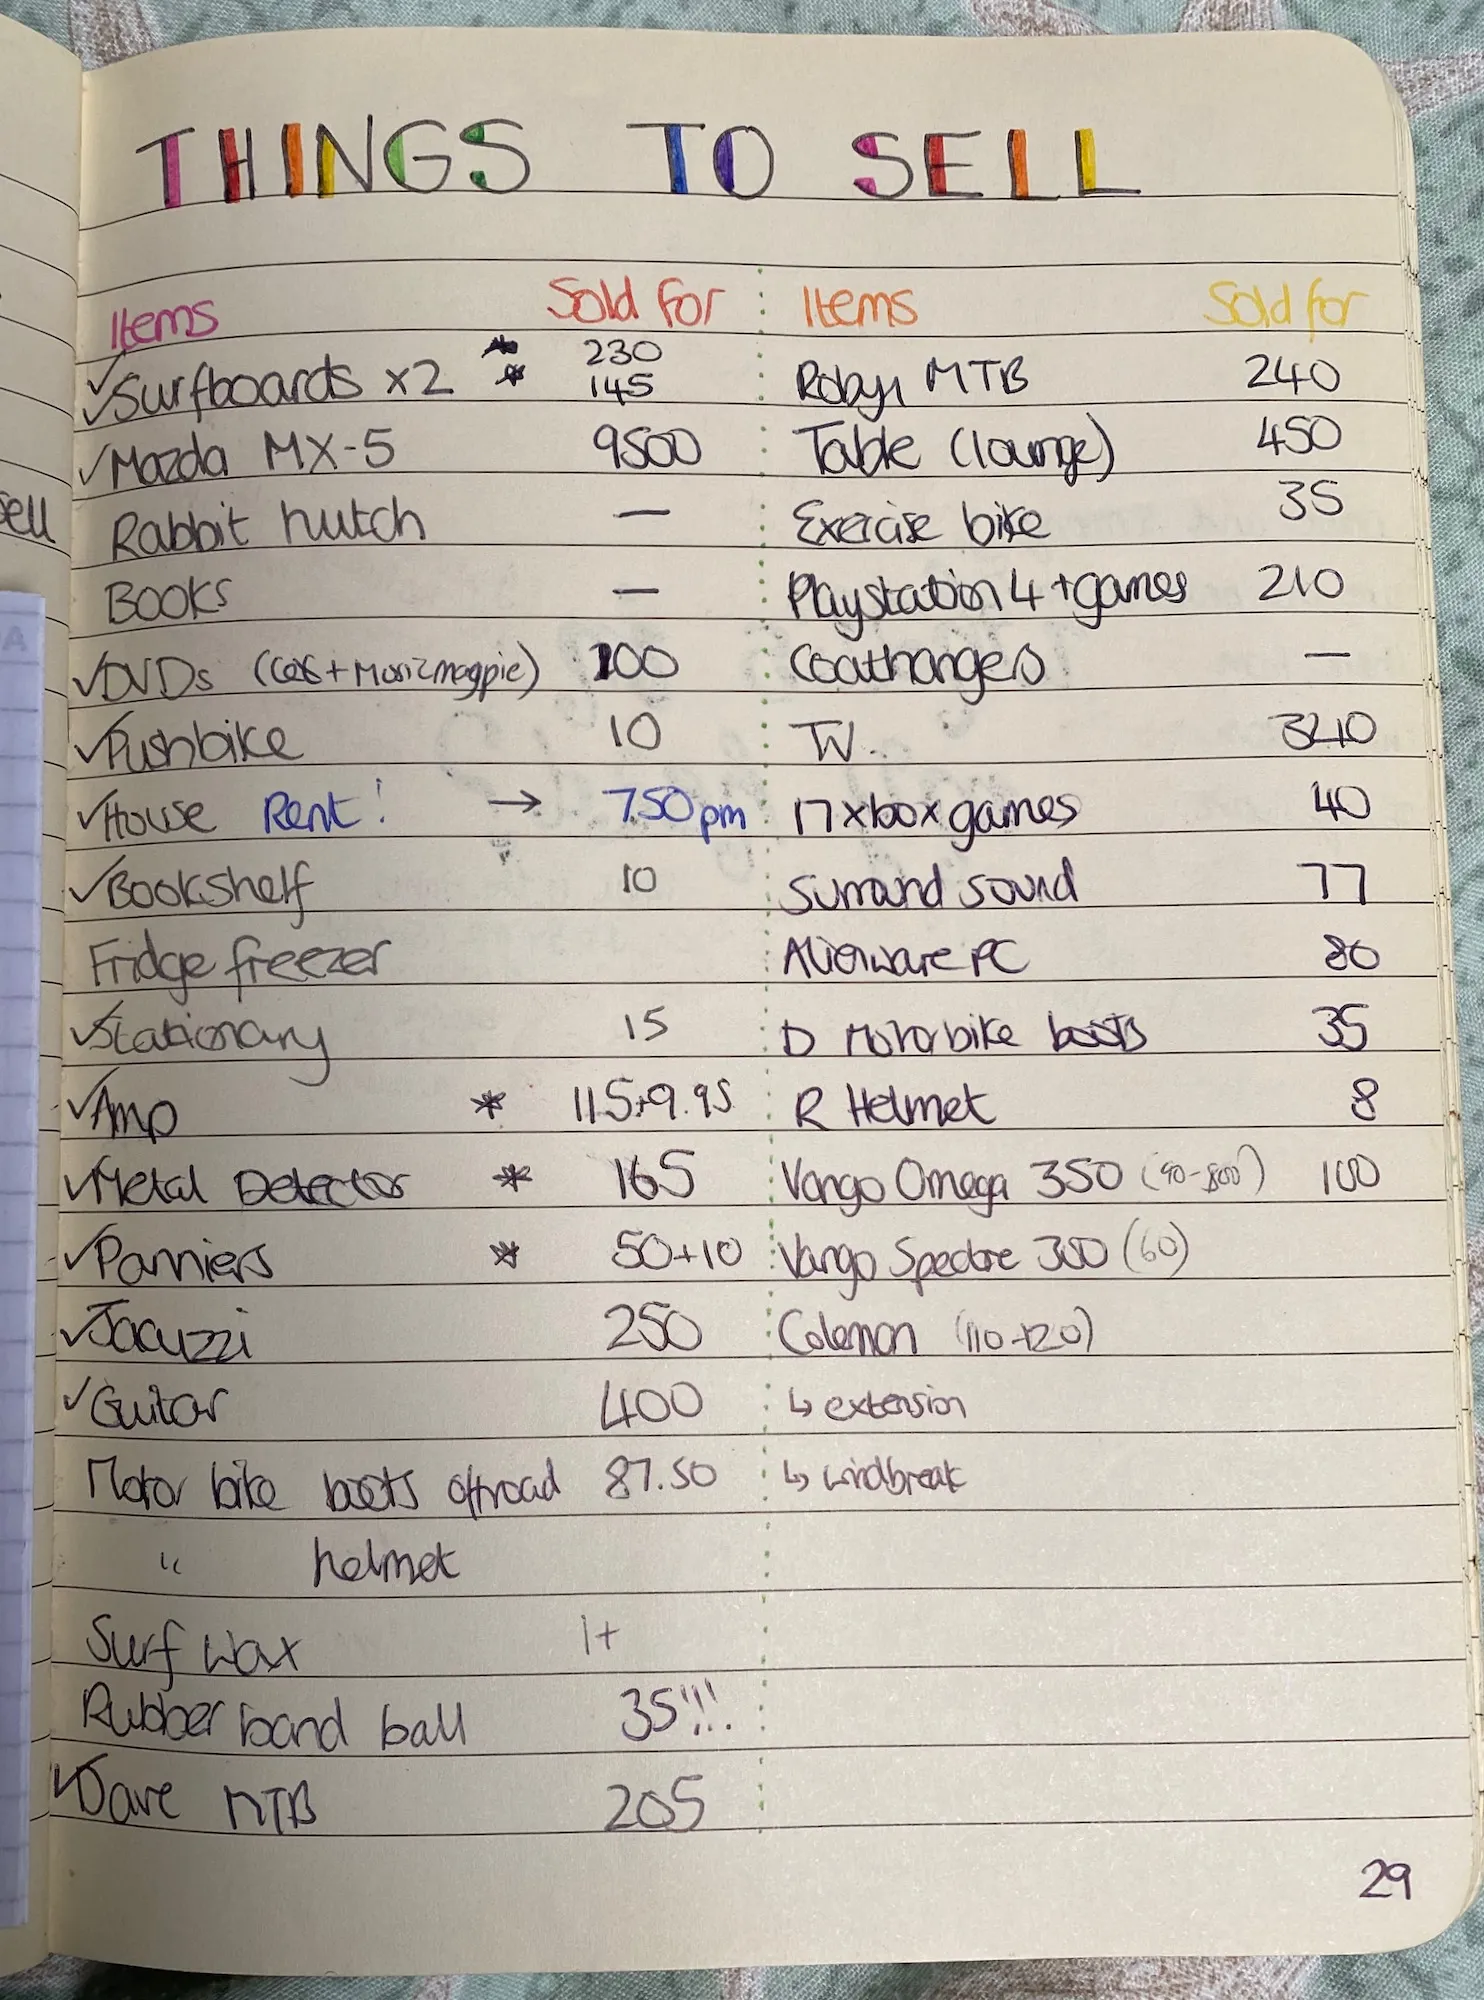 My diary with some of the items I sold before we left to go sailing.